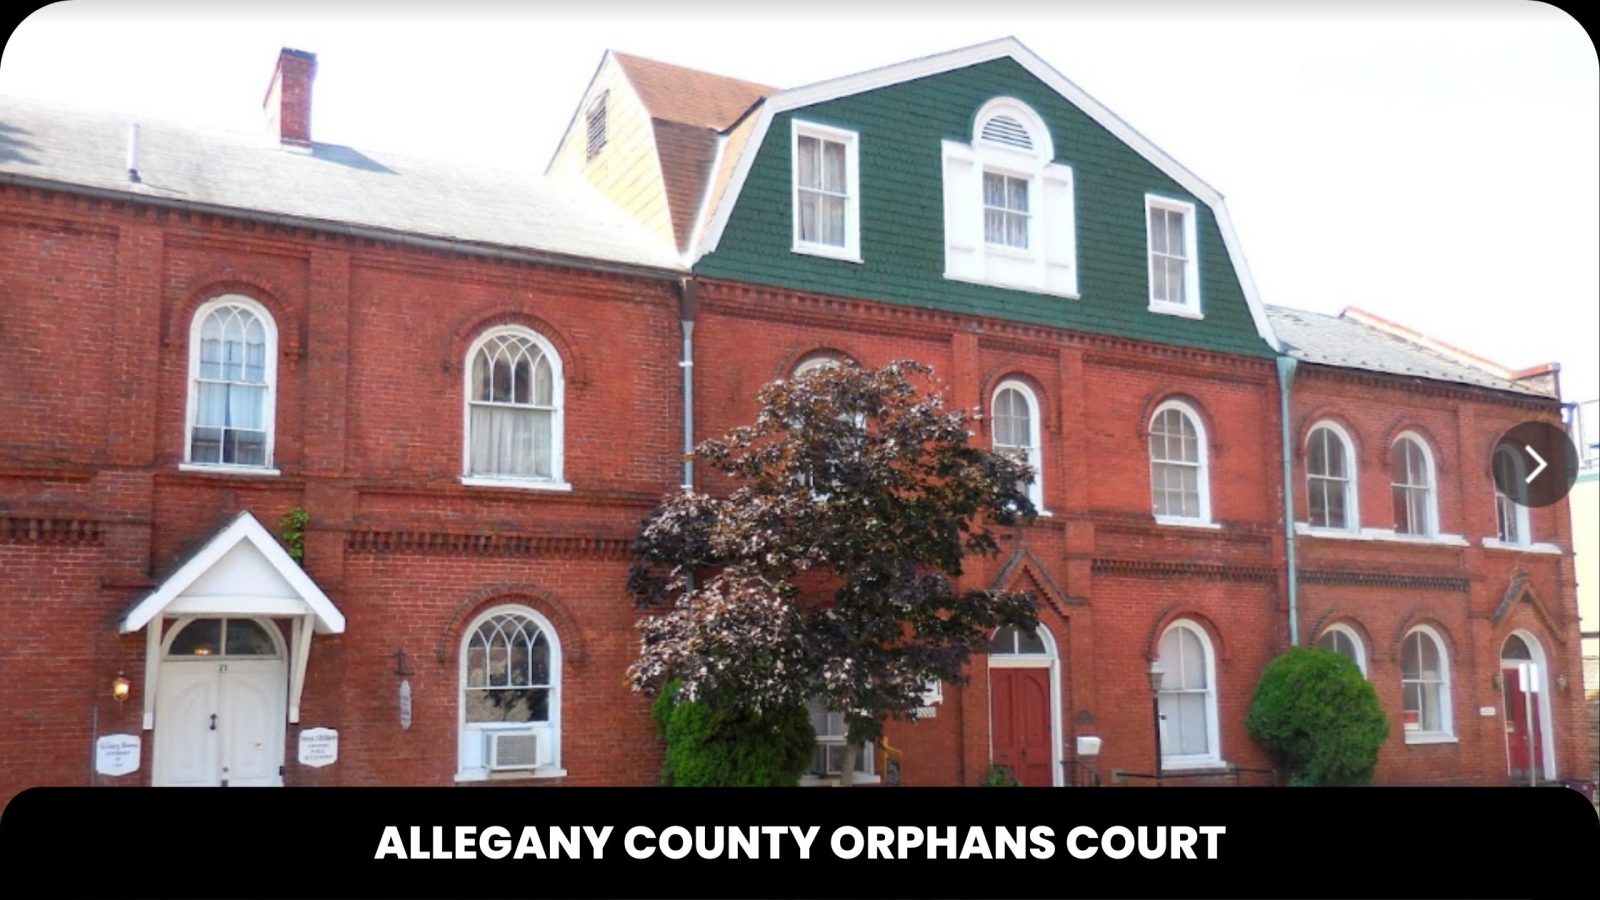 Allegany County Orphans Court